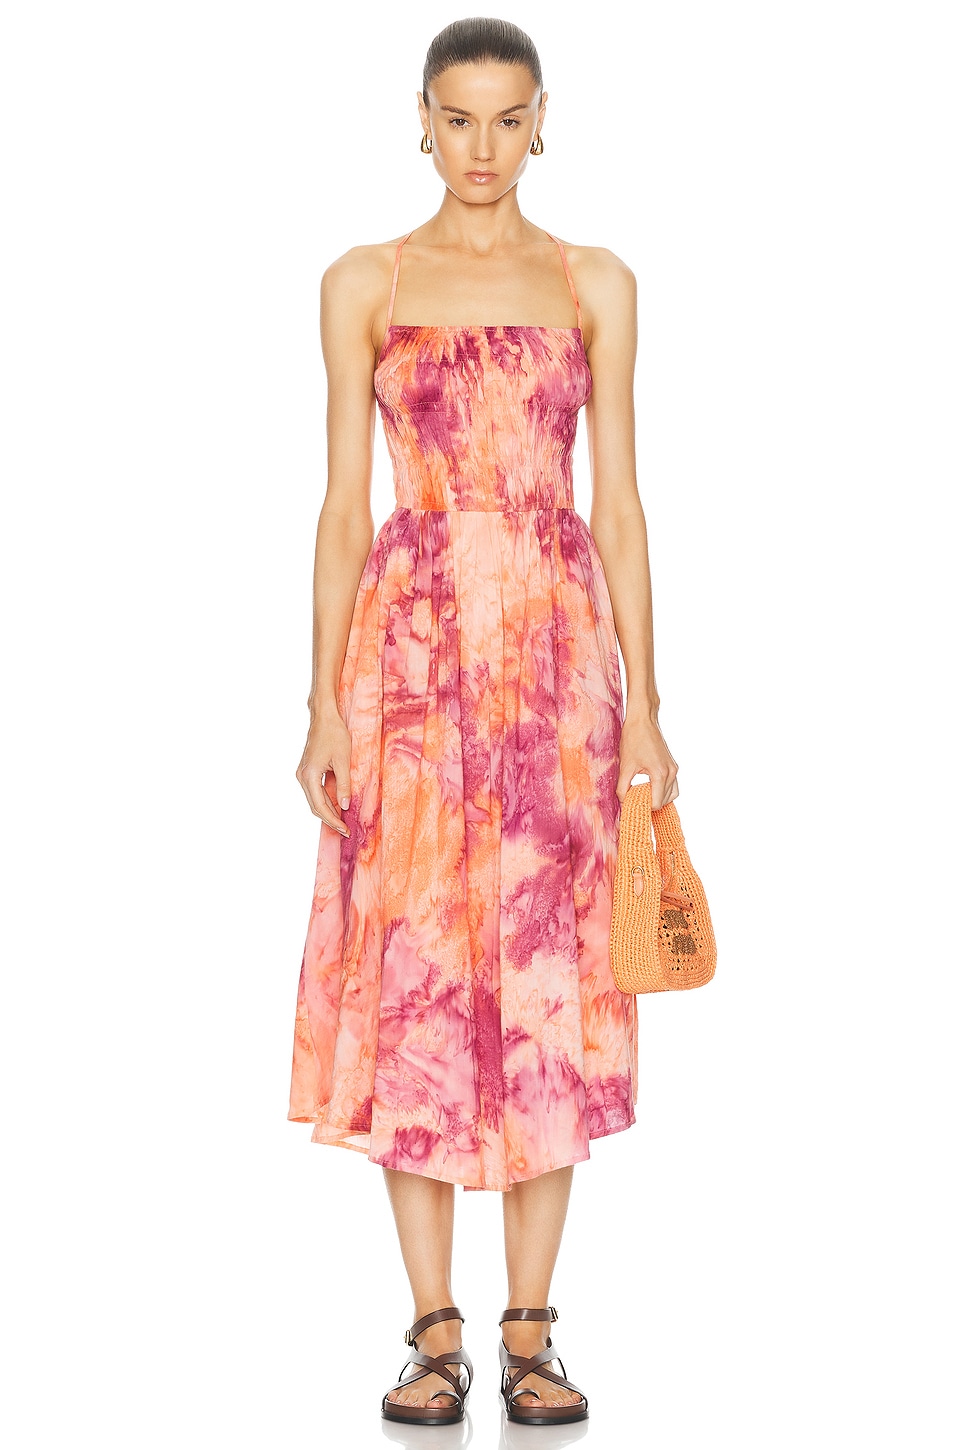 Image 1 of All That Remains Kai Dress in Plum & Peach Tie Dye